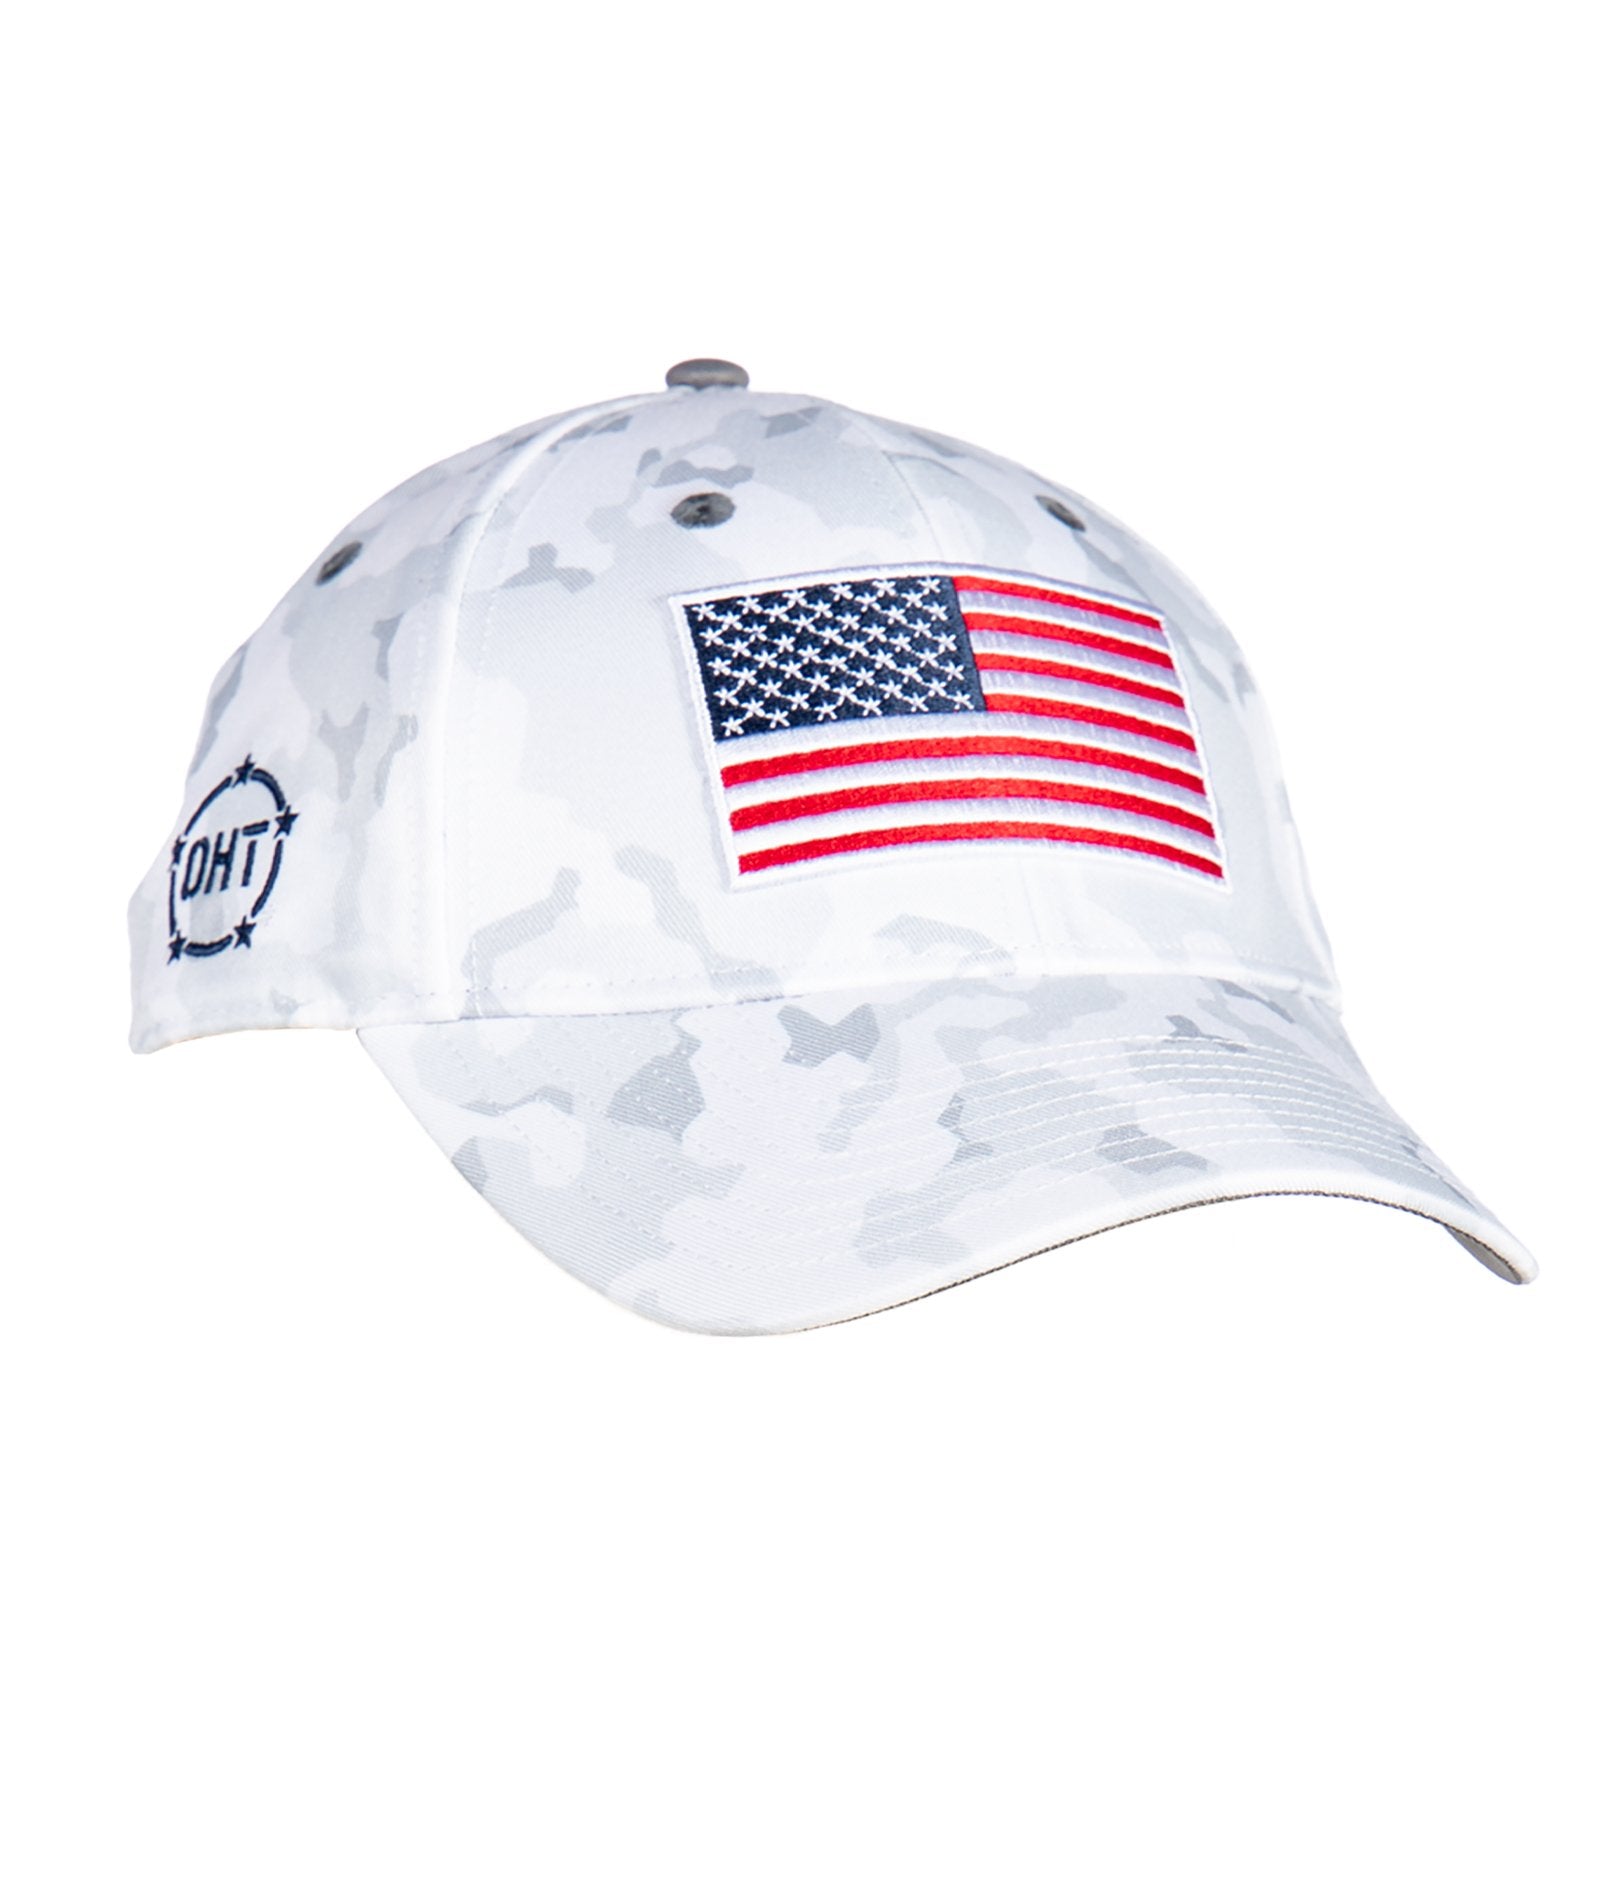 Operation Hat Trick White Out Snapback Adjustable Hat